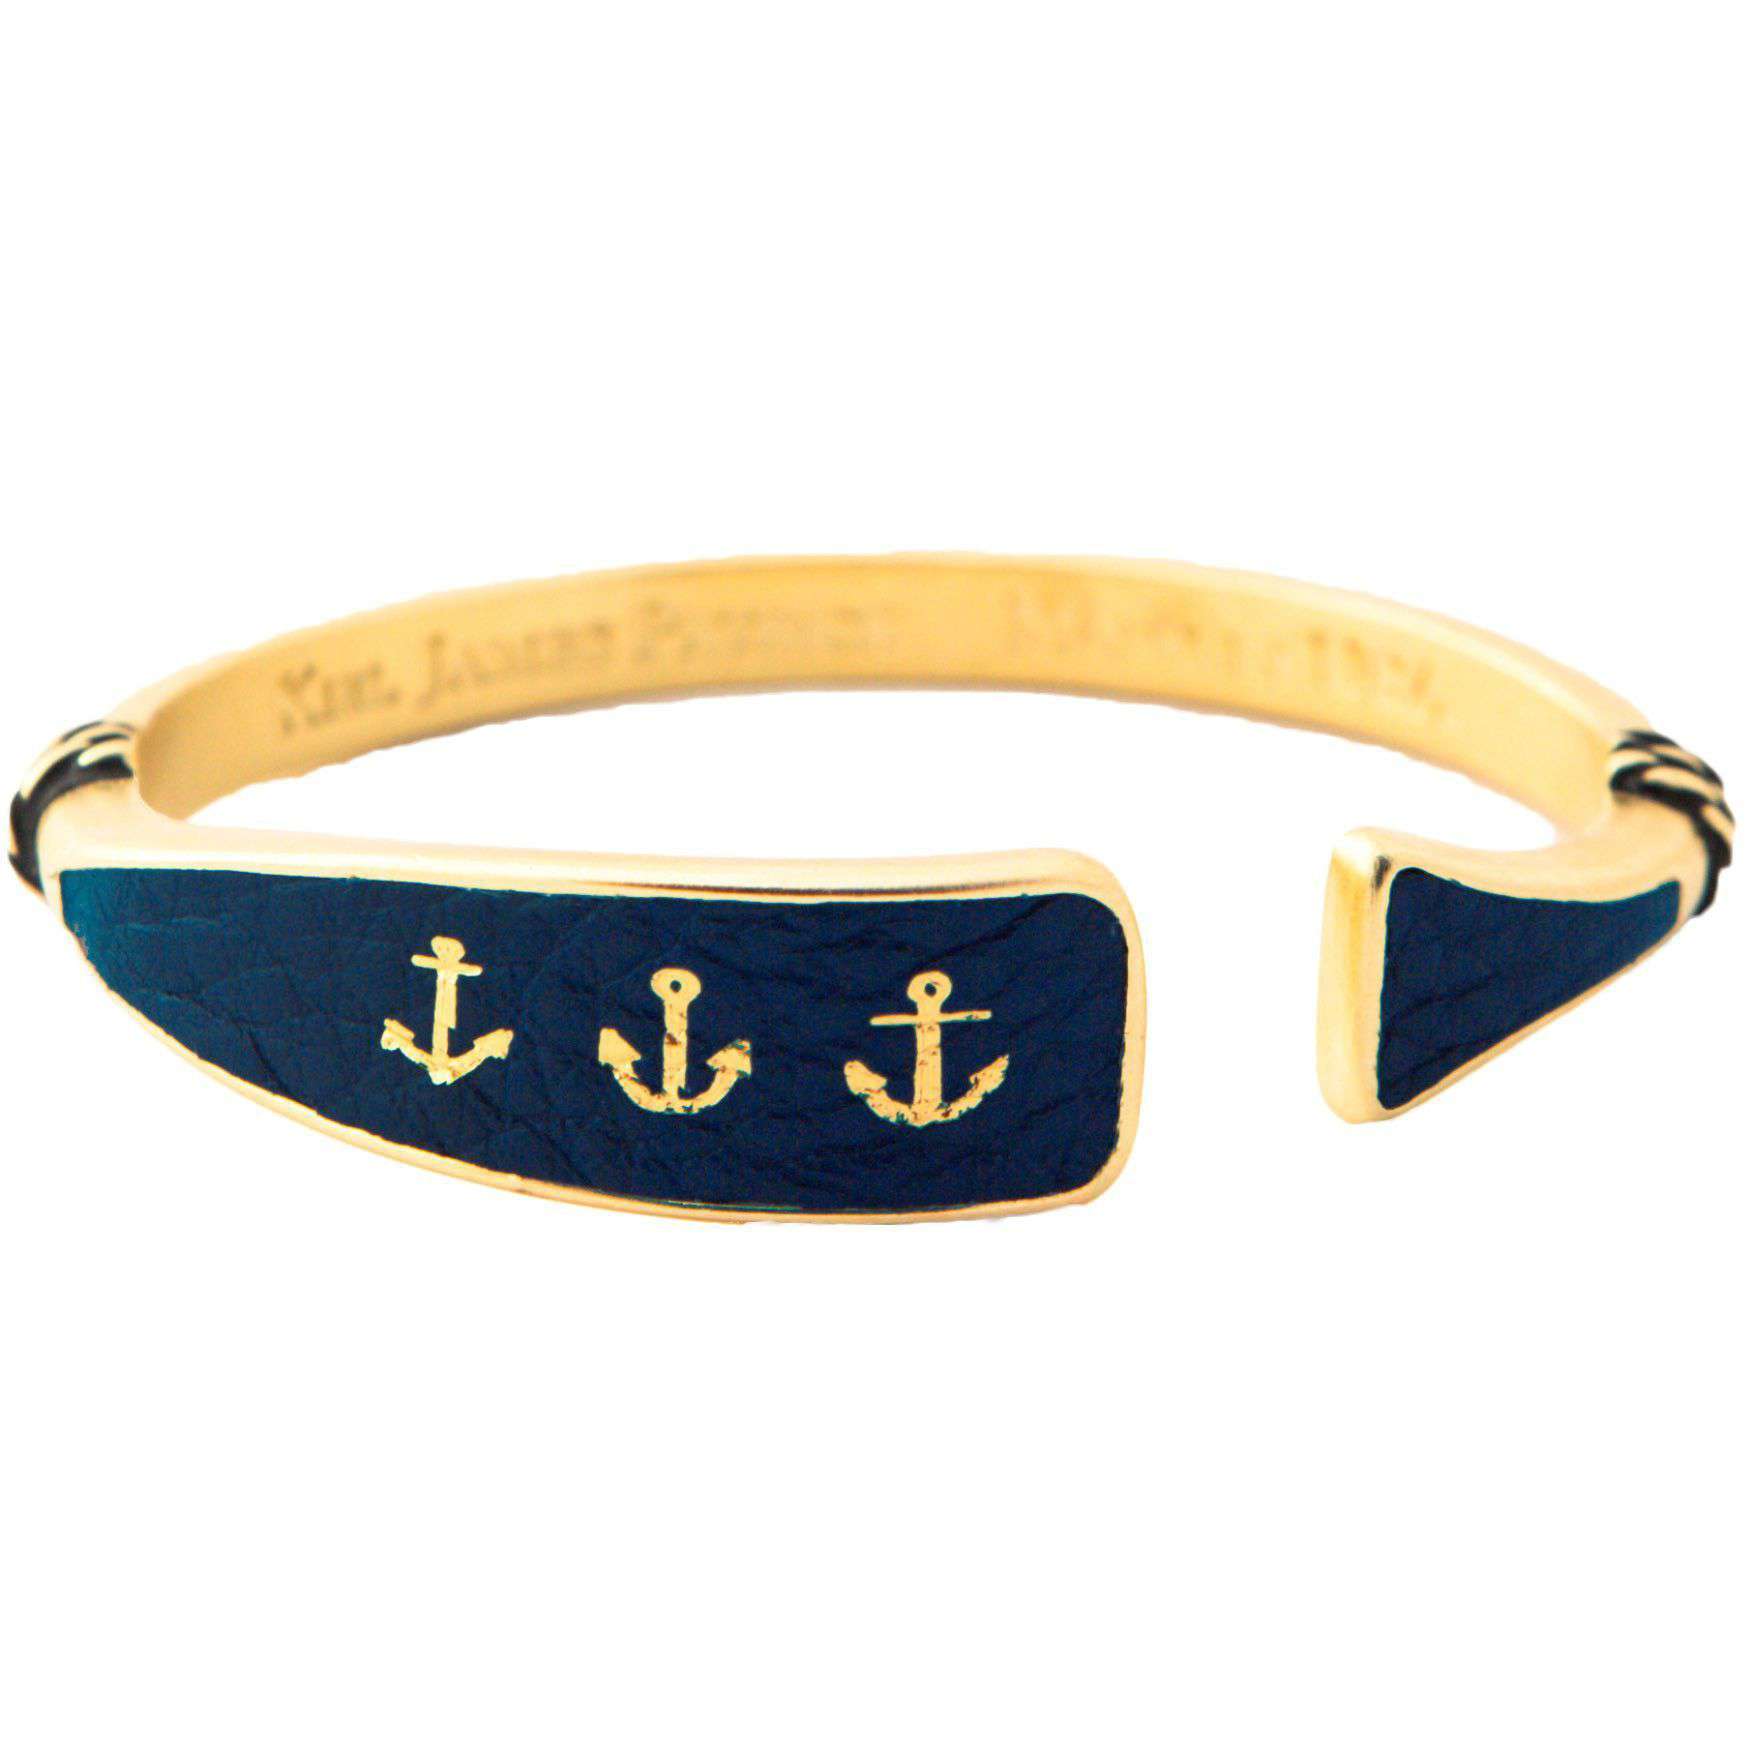 Sunset Sail Oar Cuff in Gold and Navy by Kiel James Patrick - Country Club Prep